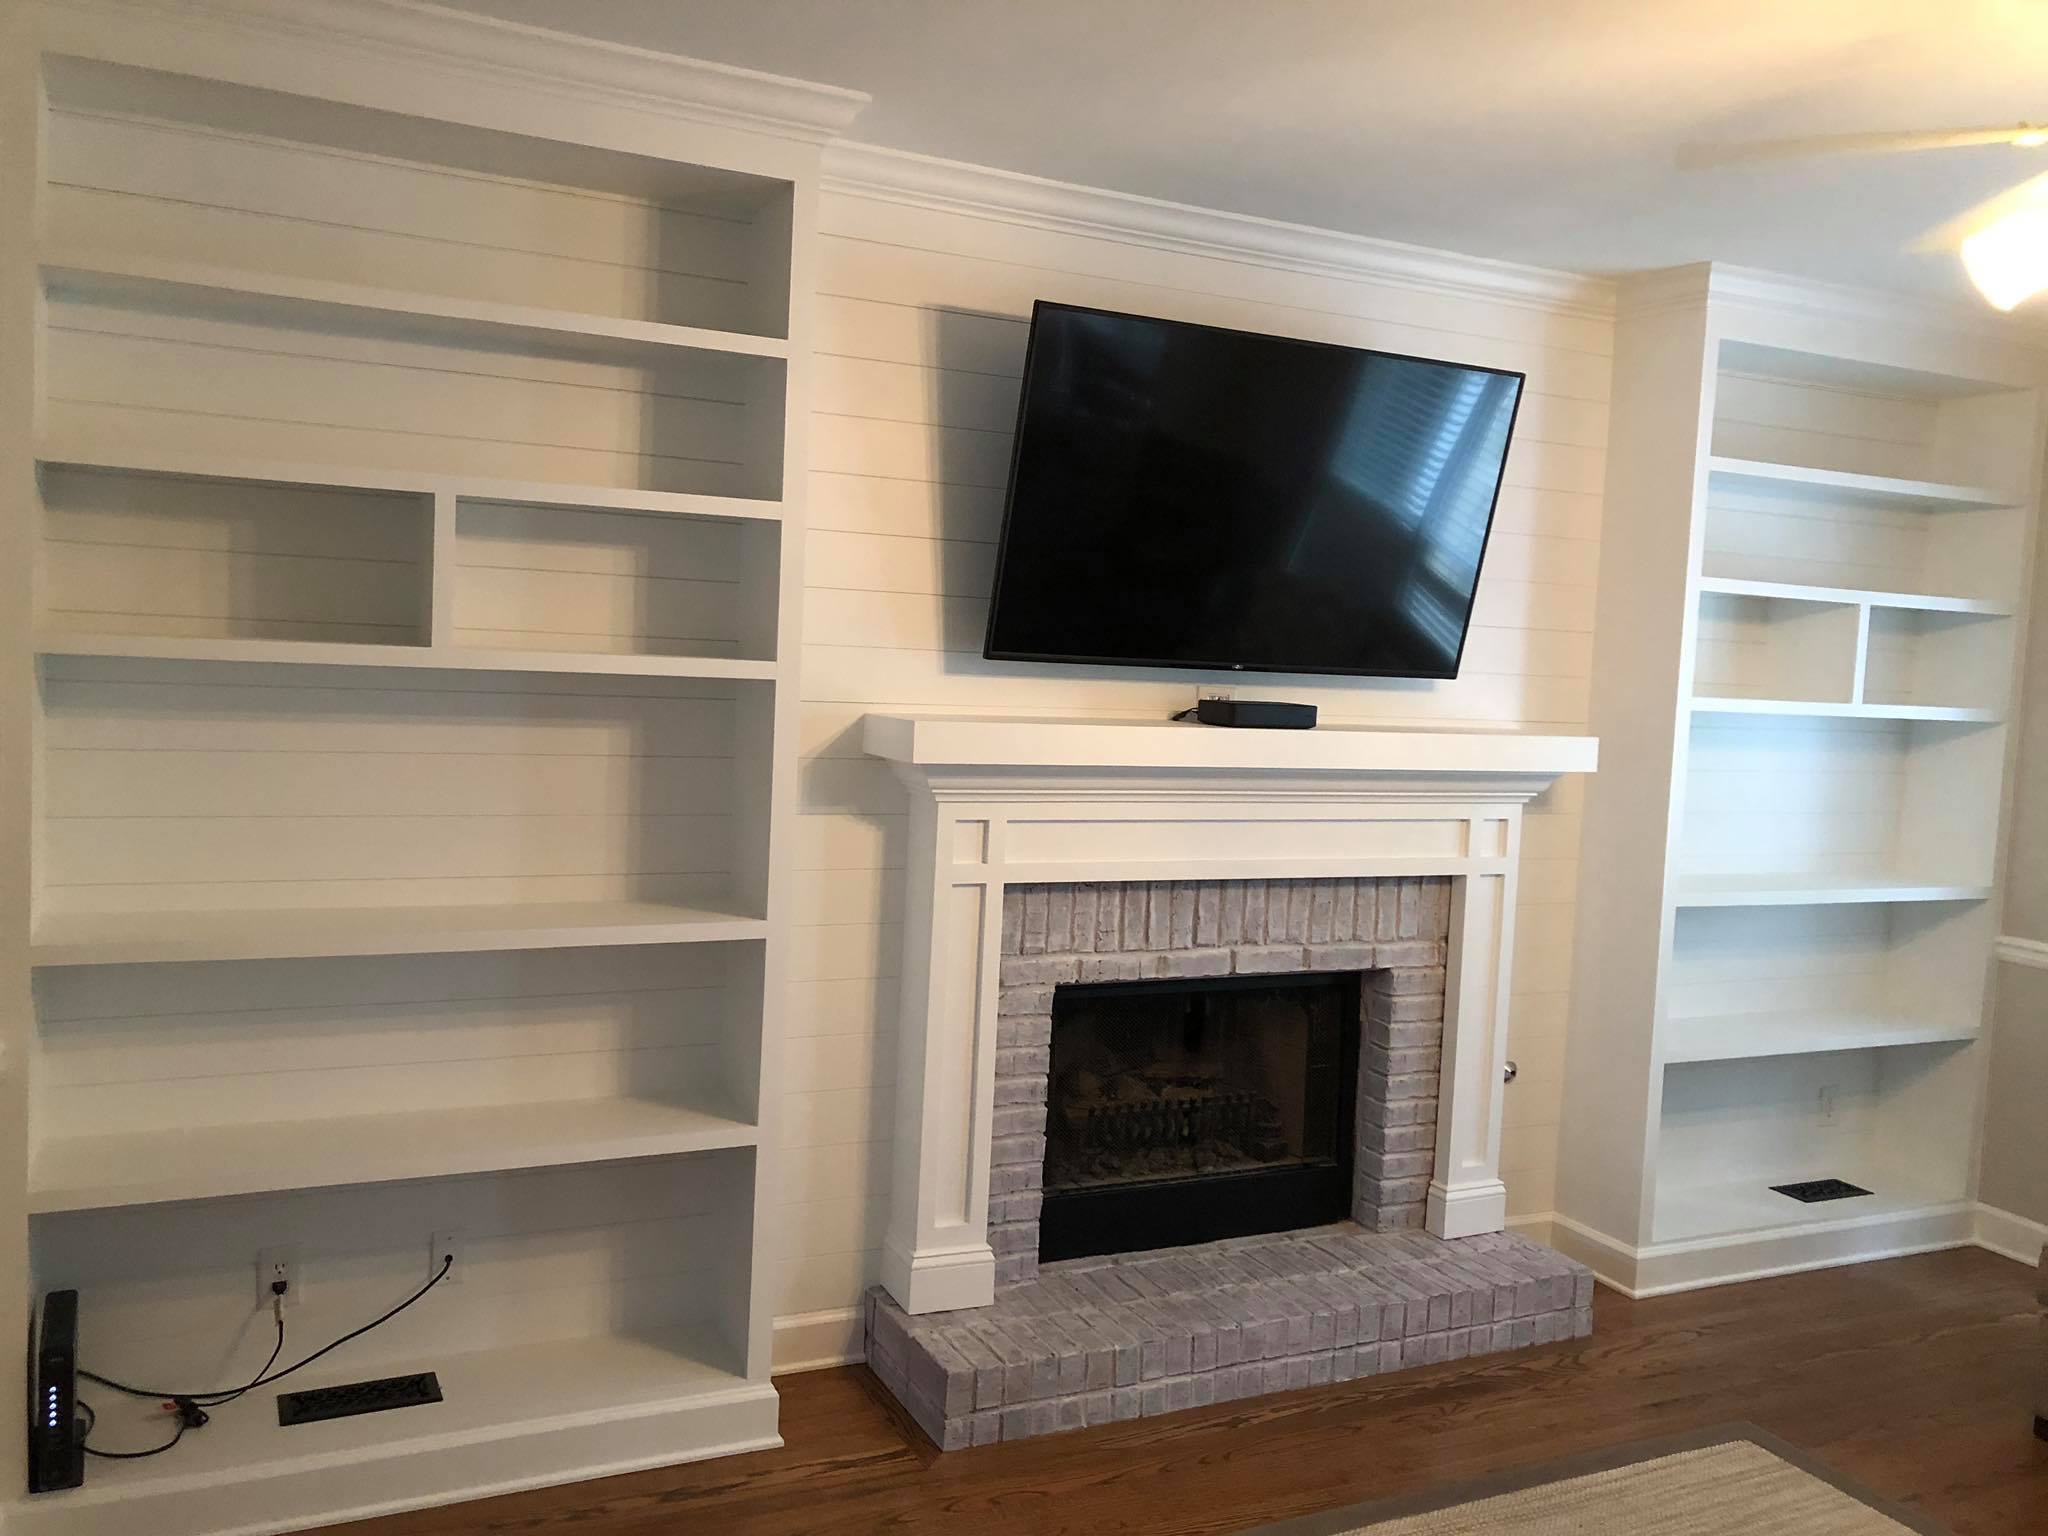 Fireplace Custom Wall High Built in Cabinets Shelves and Trim Painted White Installed 5